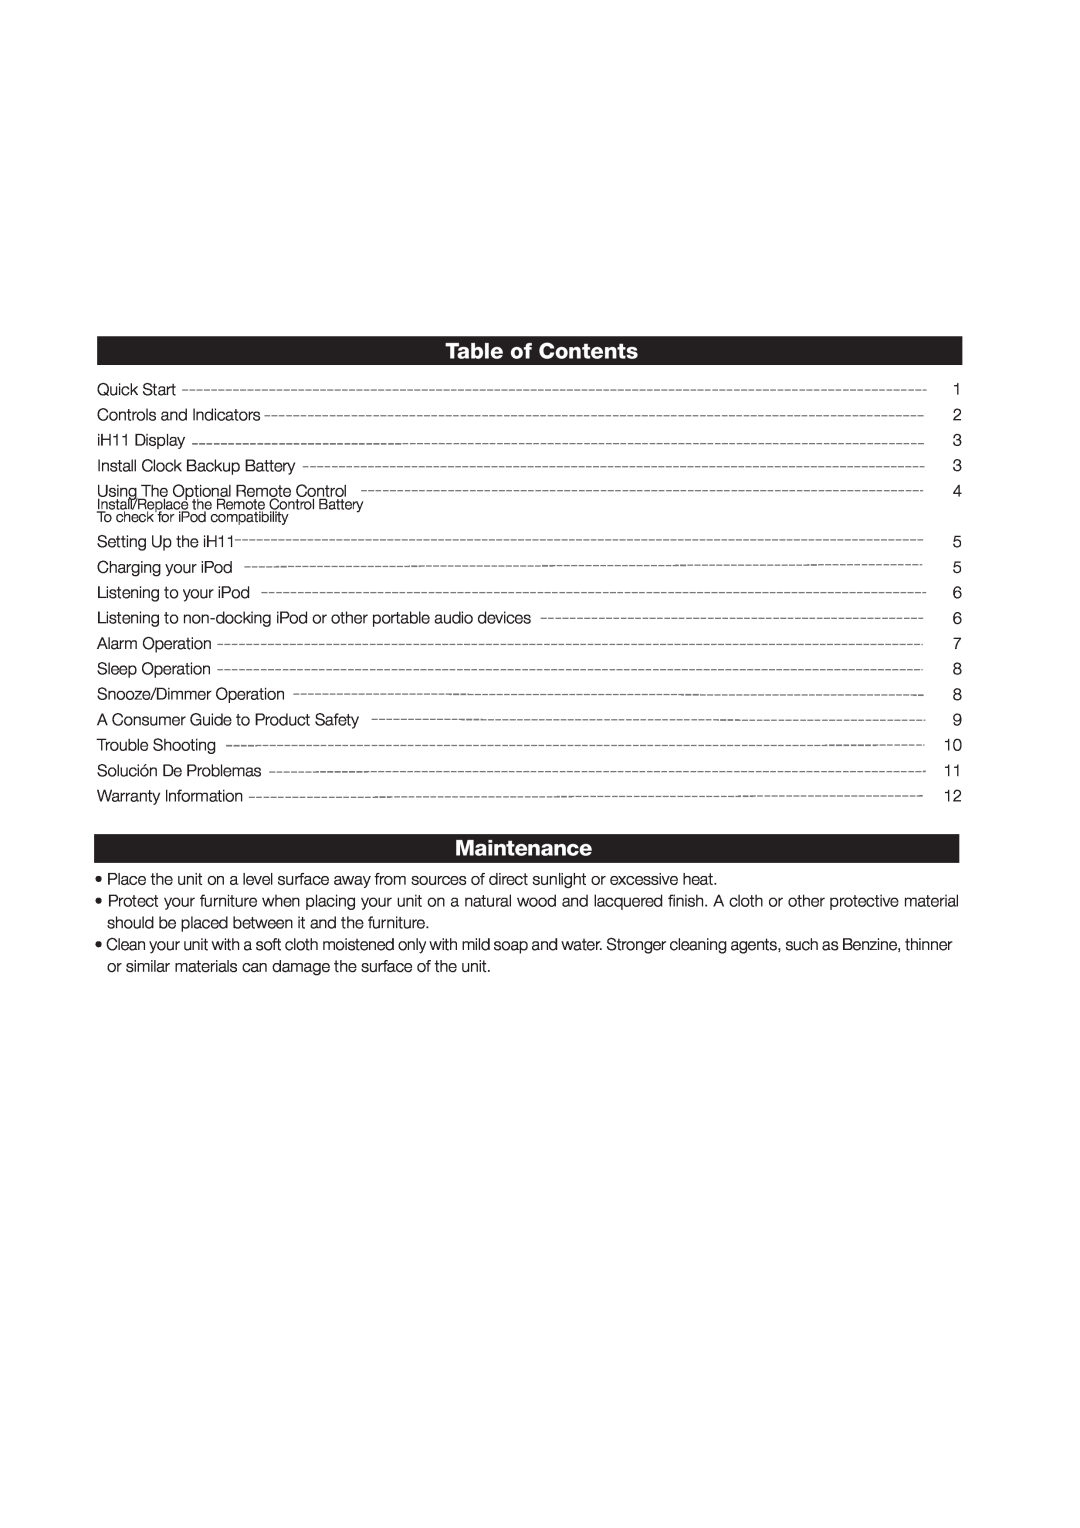 iHome iH11 manual Table of Contents, Maintenance 